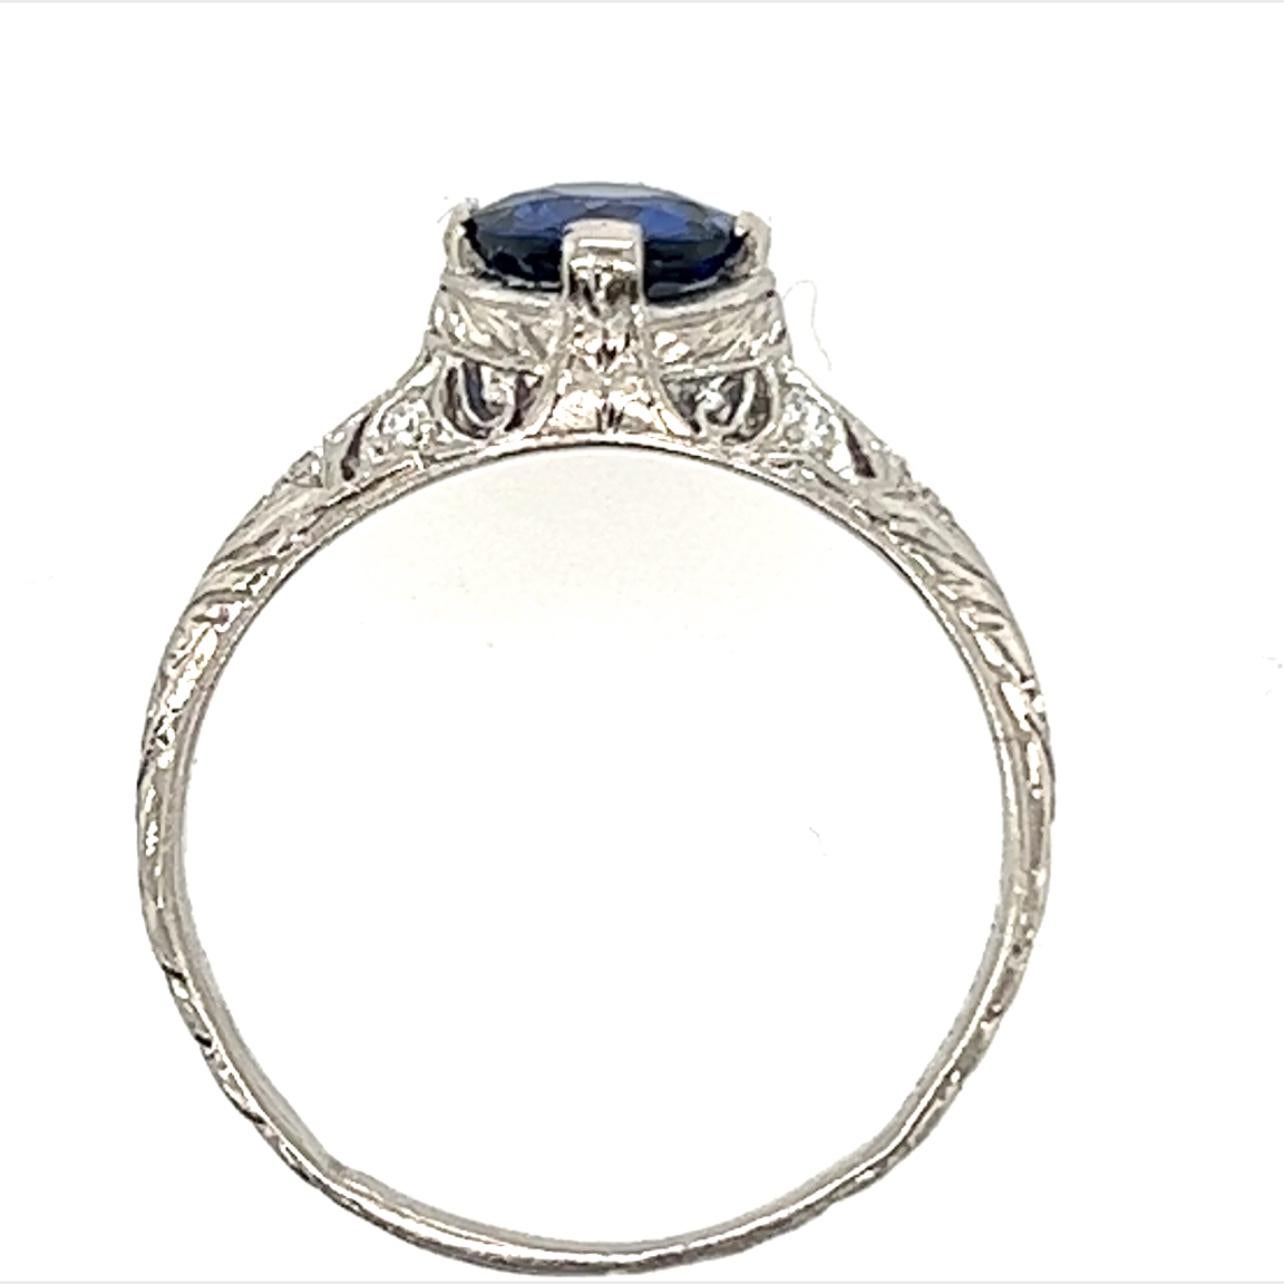 Genuine Original Victorian Antique from 1850's-1870's Vintage Sapphire Diamond Ring 1.11ct Platinum 


Featuring a Royal Blue 1.01 Carat Genuine Natural Round Sapphire Center

Twinkling with Genuine Antique Single Cut Natural Mined Diamonds

Perfect